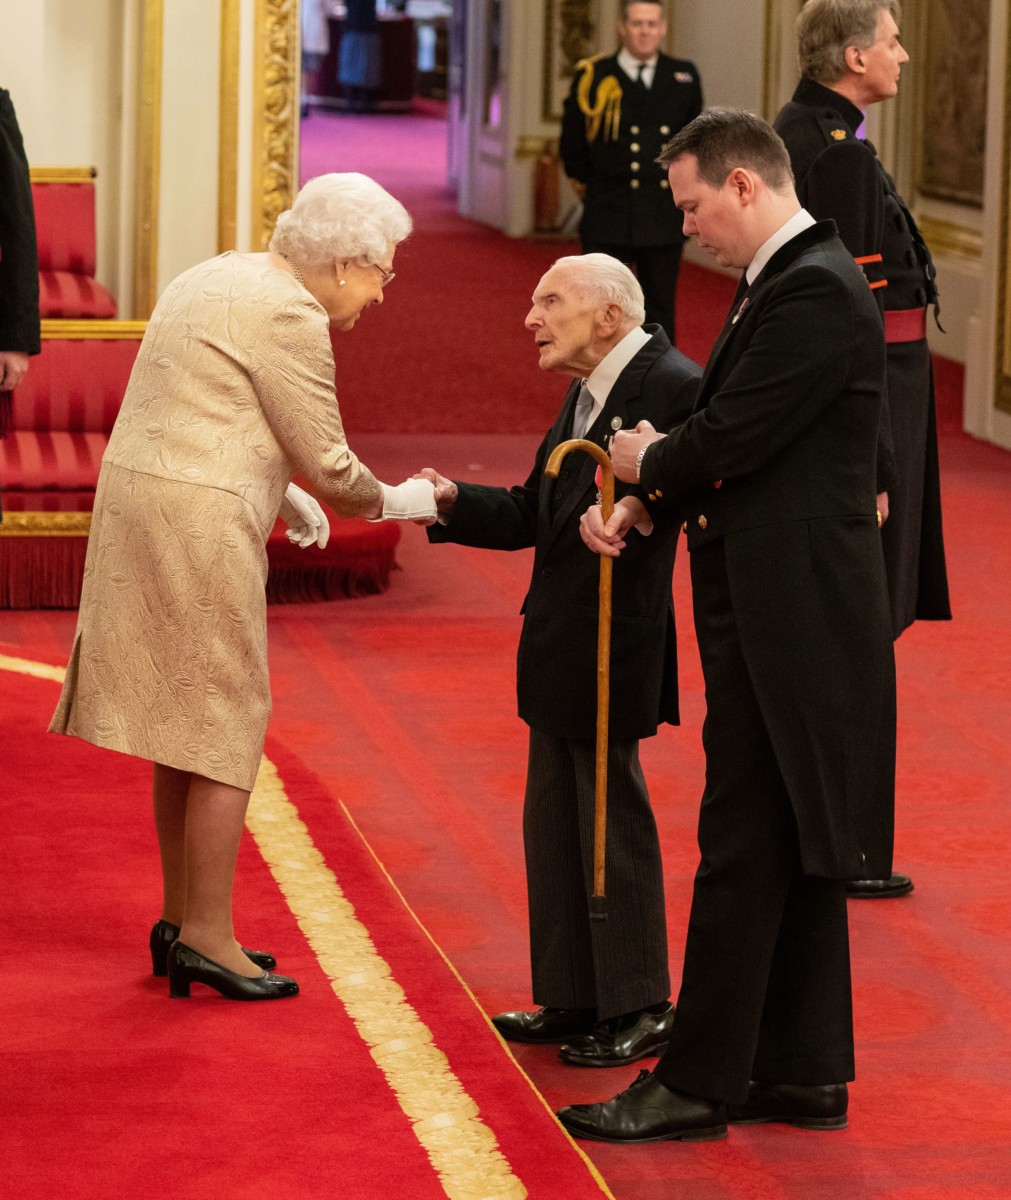 This is the moment Horace 'Harry' Billinge met the Queen today while accepting his MBE